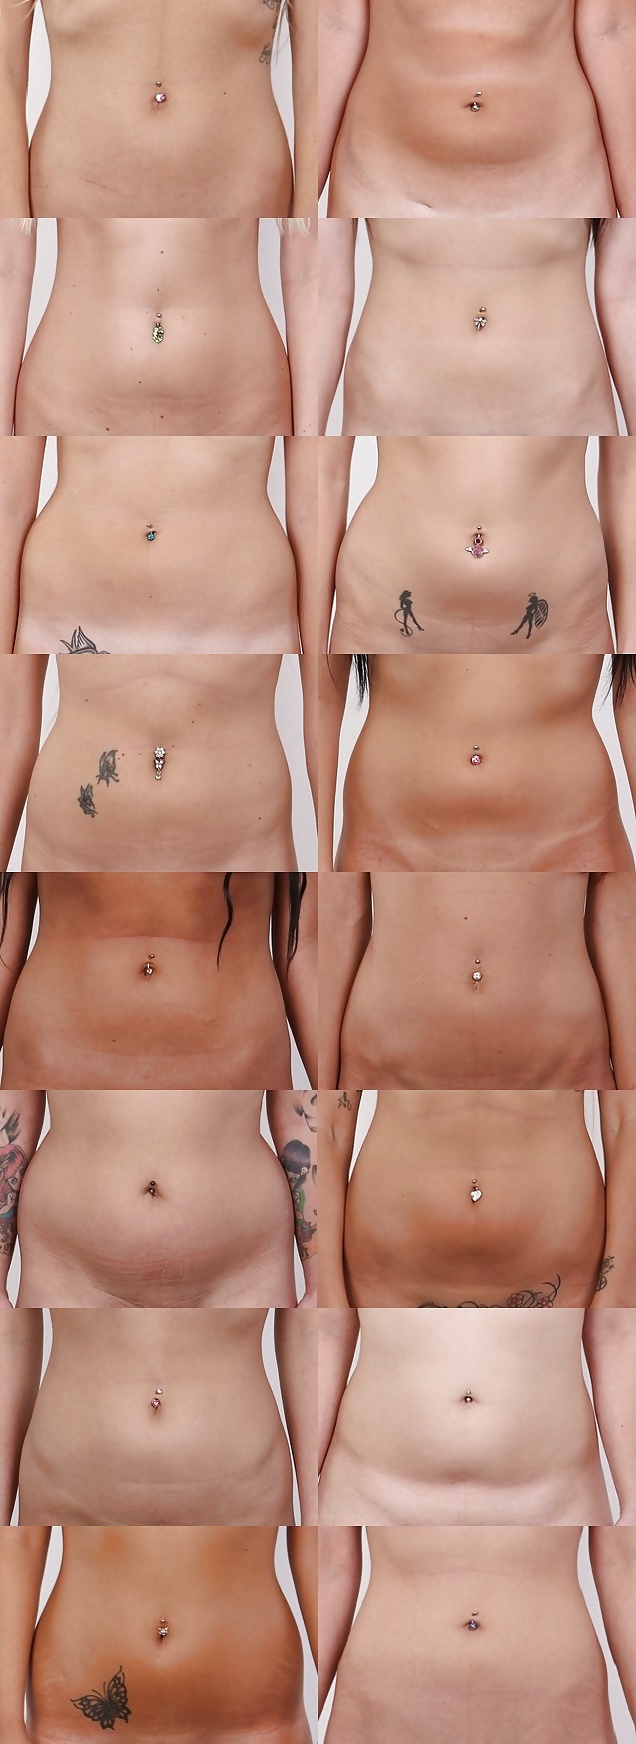 160 Czech Casting Girls Belly Buttons & Belly Rings #31651138